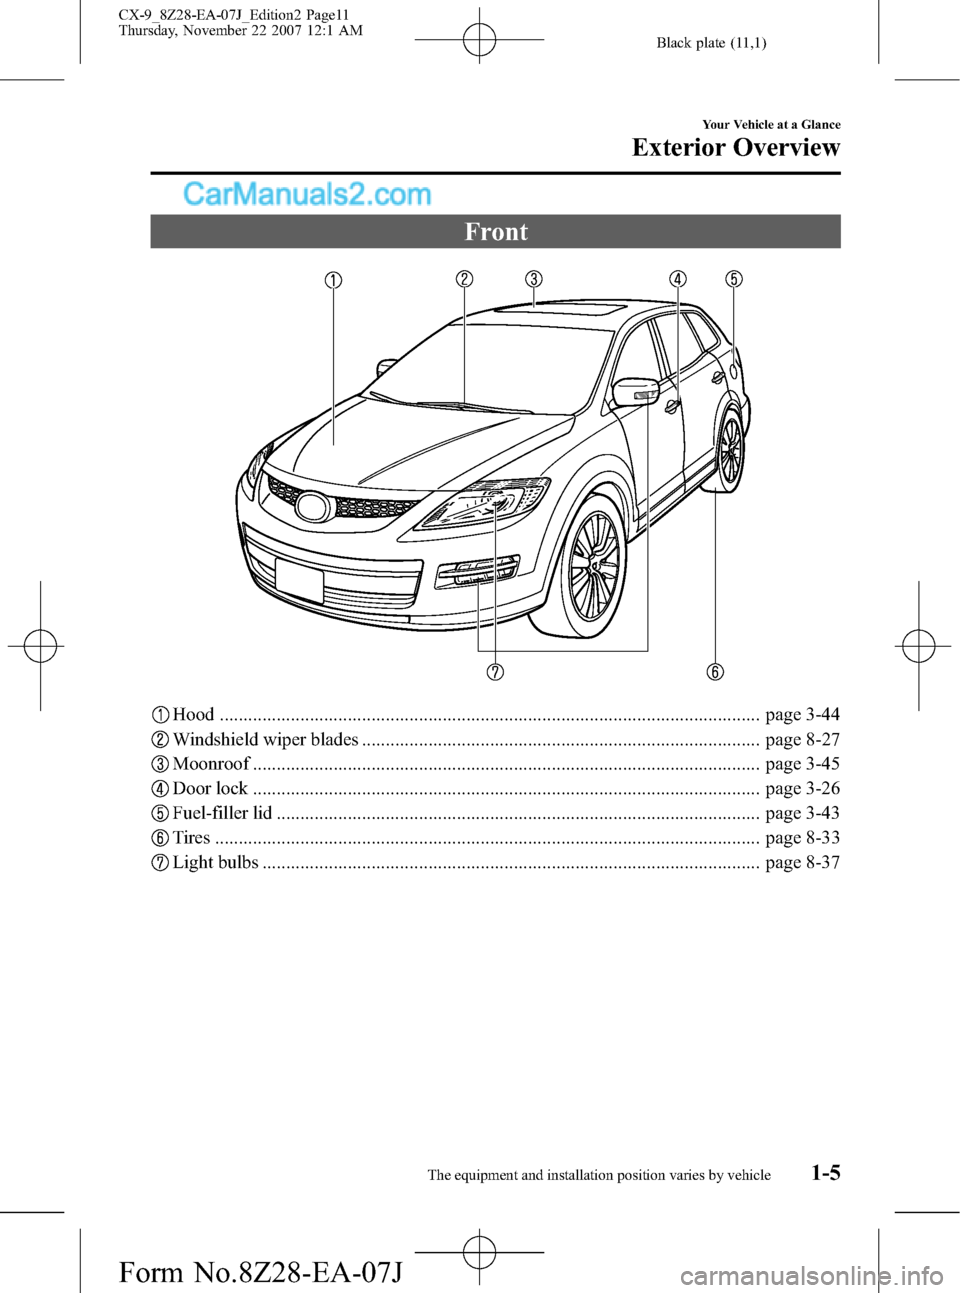 MAZDA MODEL CX-9 2008  Owners Manual (in English) Black plate (11,1)
Front
Hood .................................................................................................................. page 3-44
Windshield wiper blades .....................